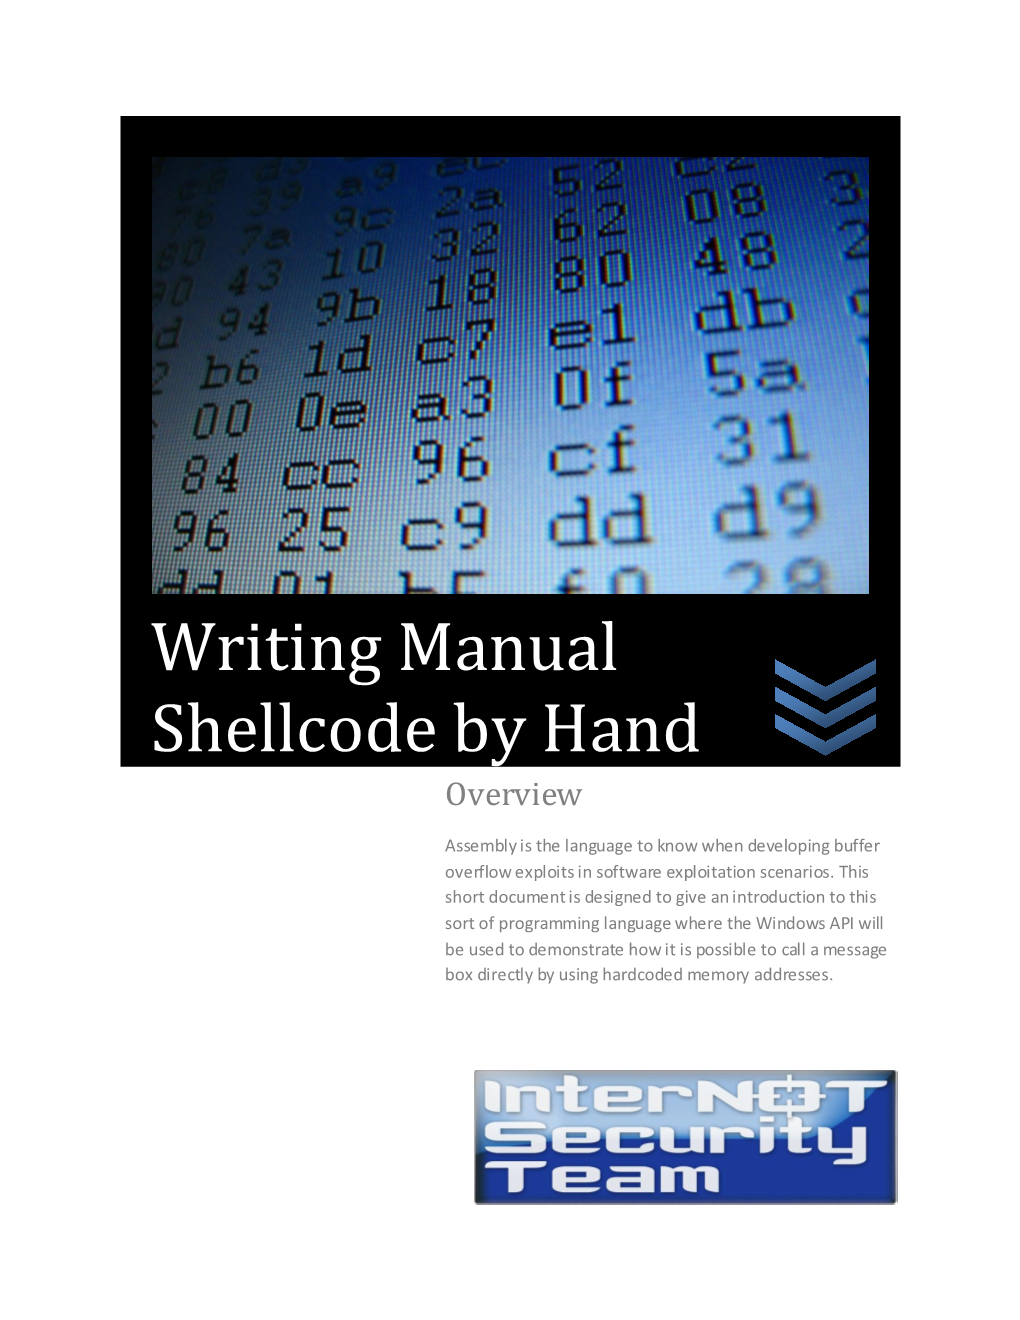 Writing Manual Shellcode by Hand Overview